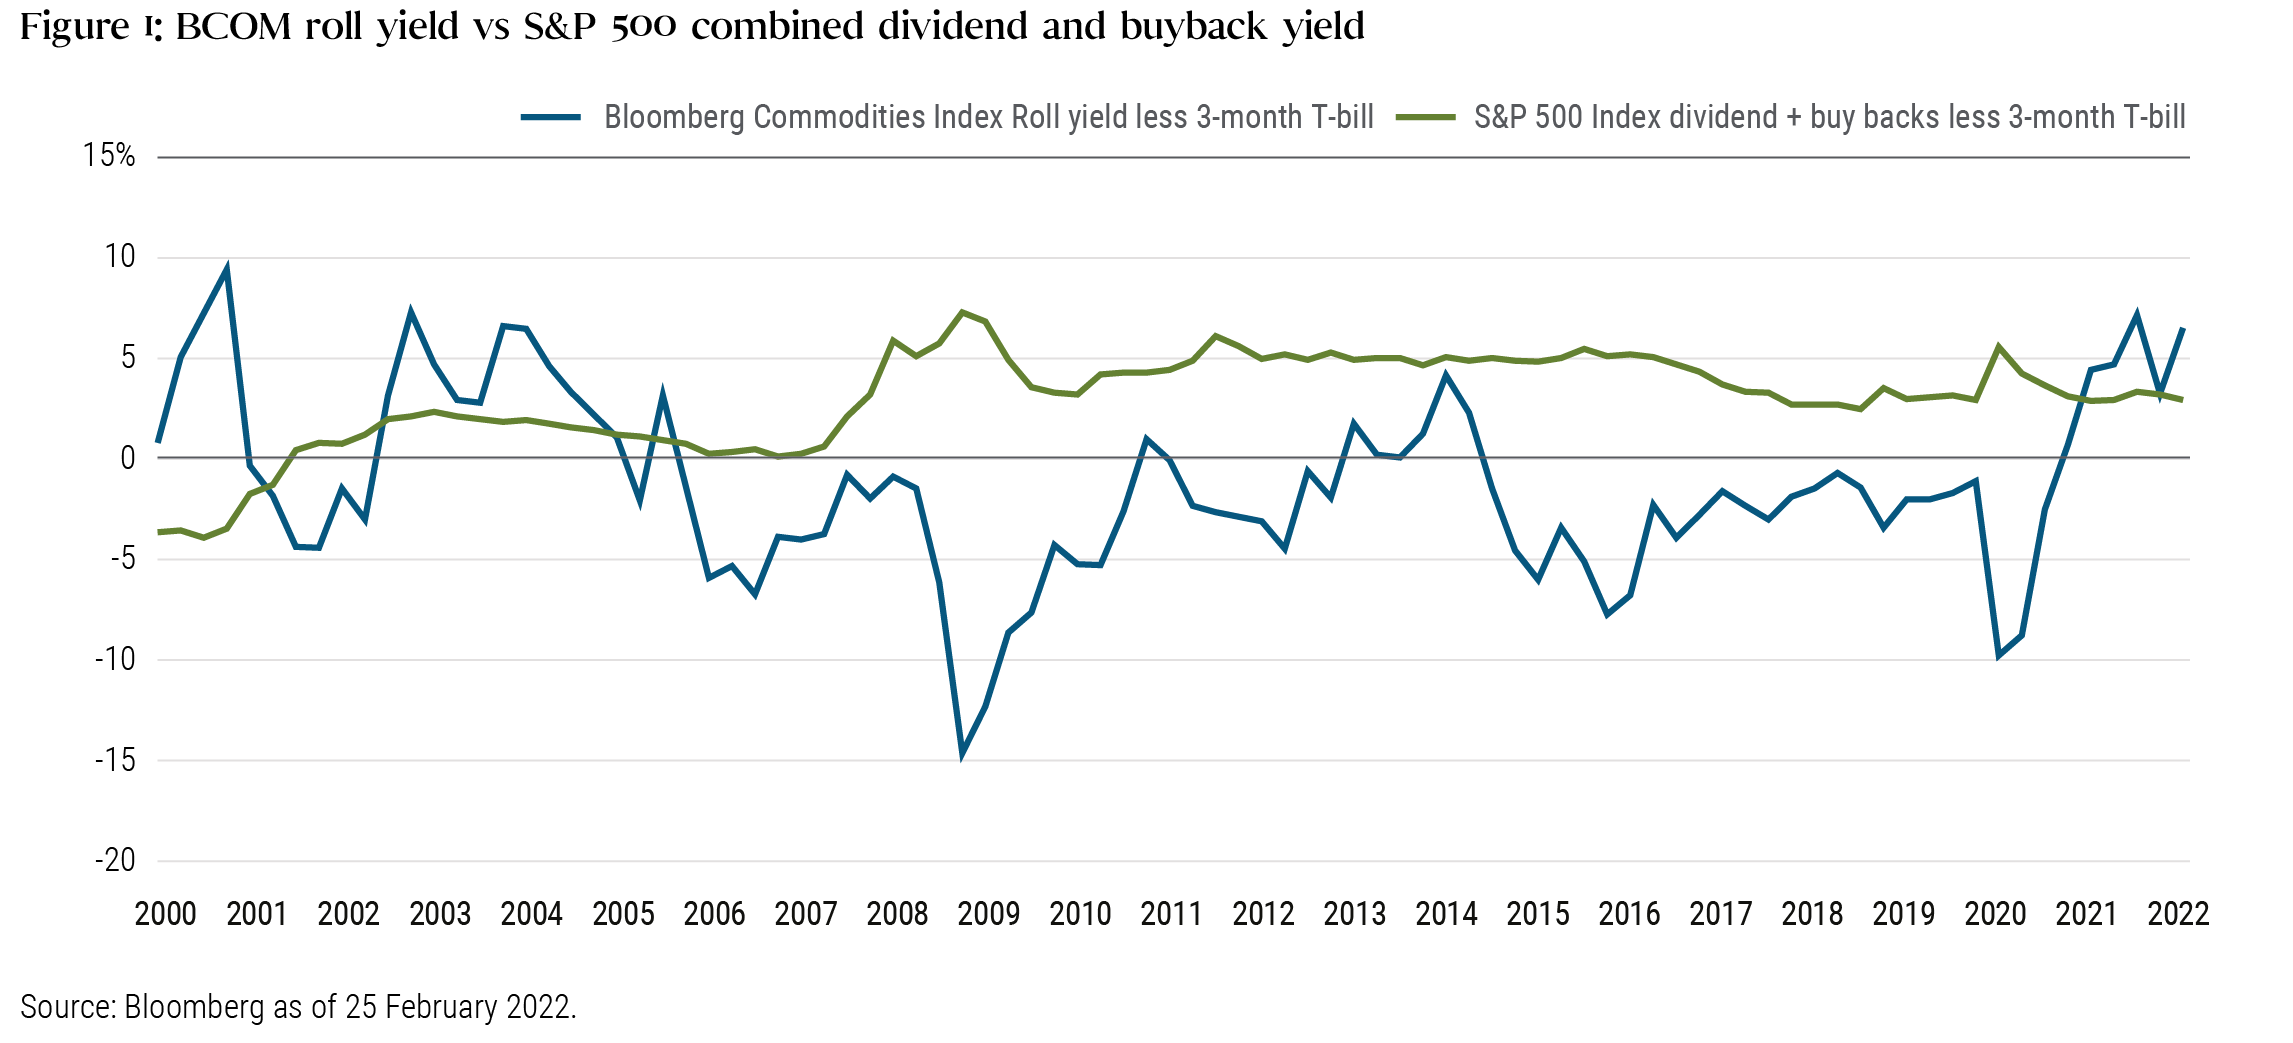 BCOM roll yield vs S&P 500 combined dividend and buyback yield